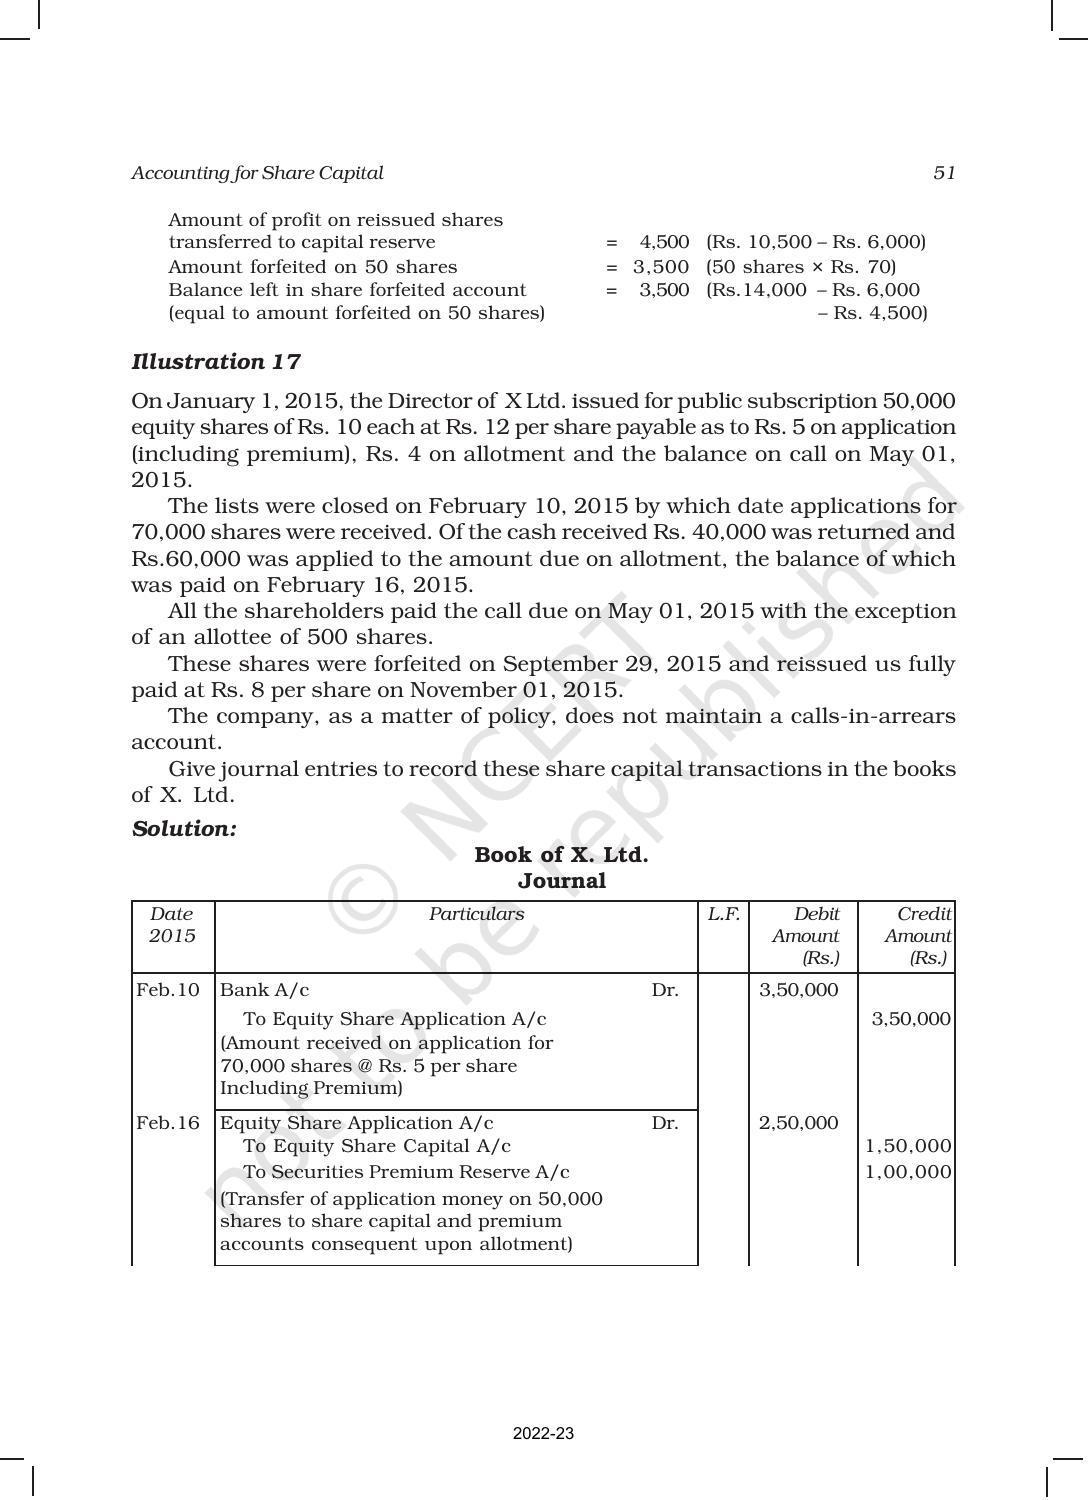 NCERT Book for Class 12 Accountancy Part II Chapter 1 Accounting for Share Capital - Page 51